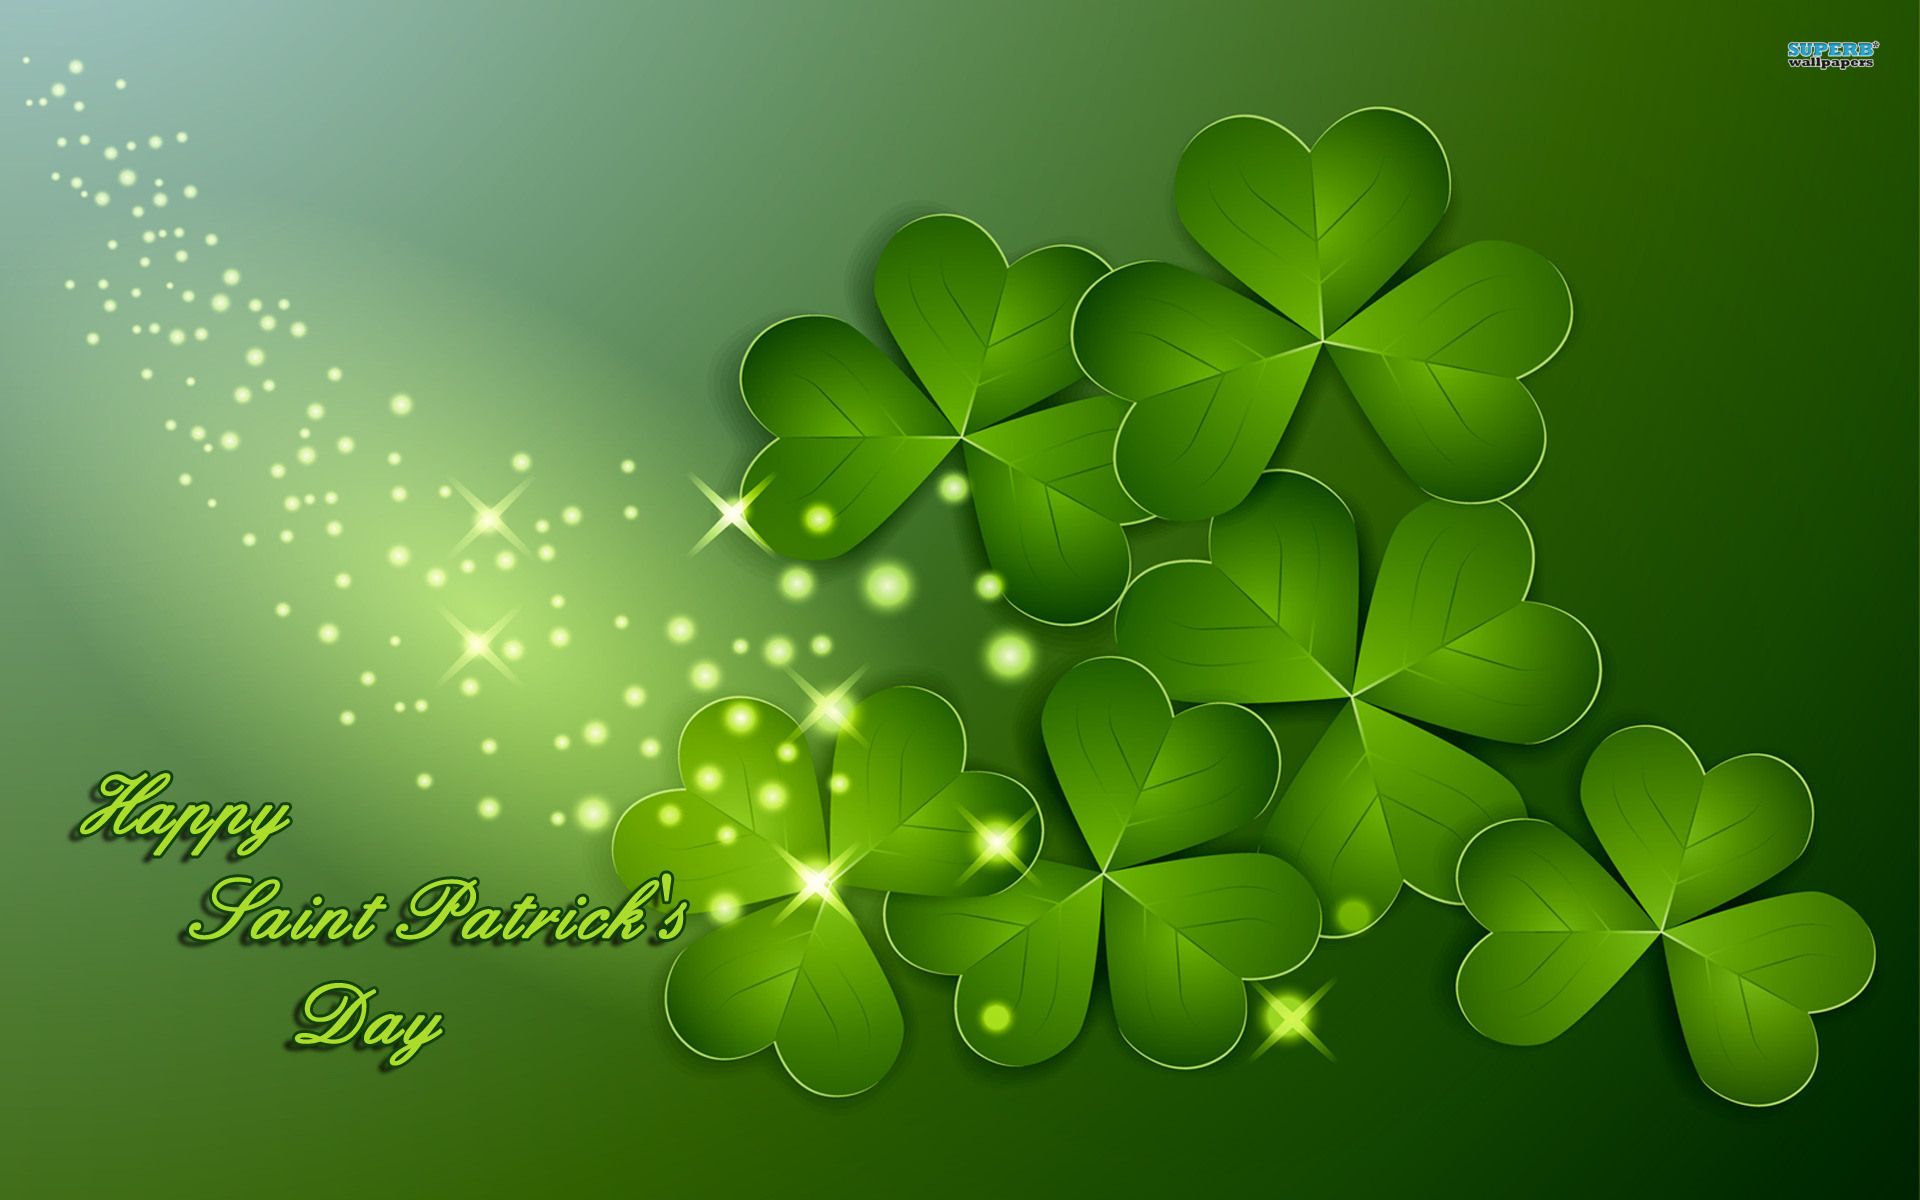 Threeleaf clover and Saint Patricks Day on a green background HD wallpaper  download